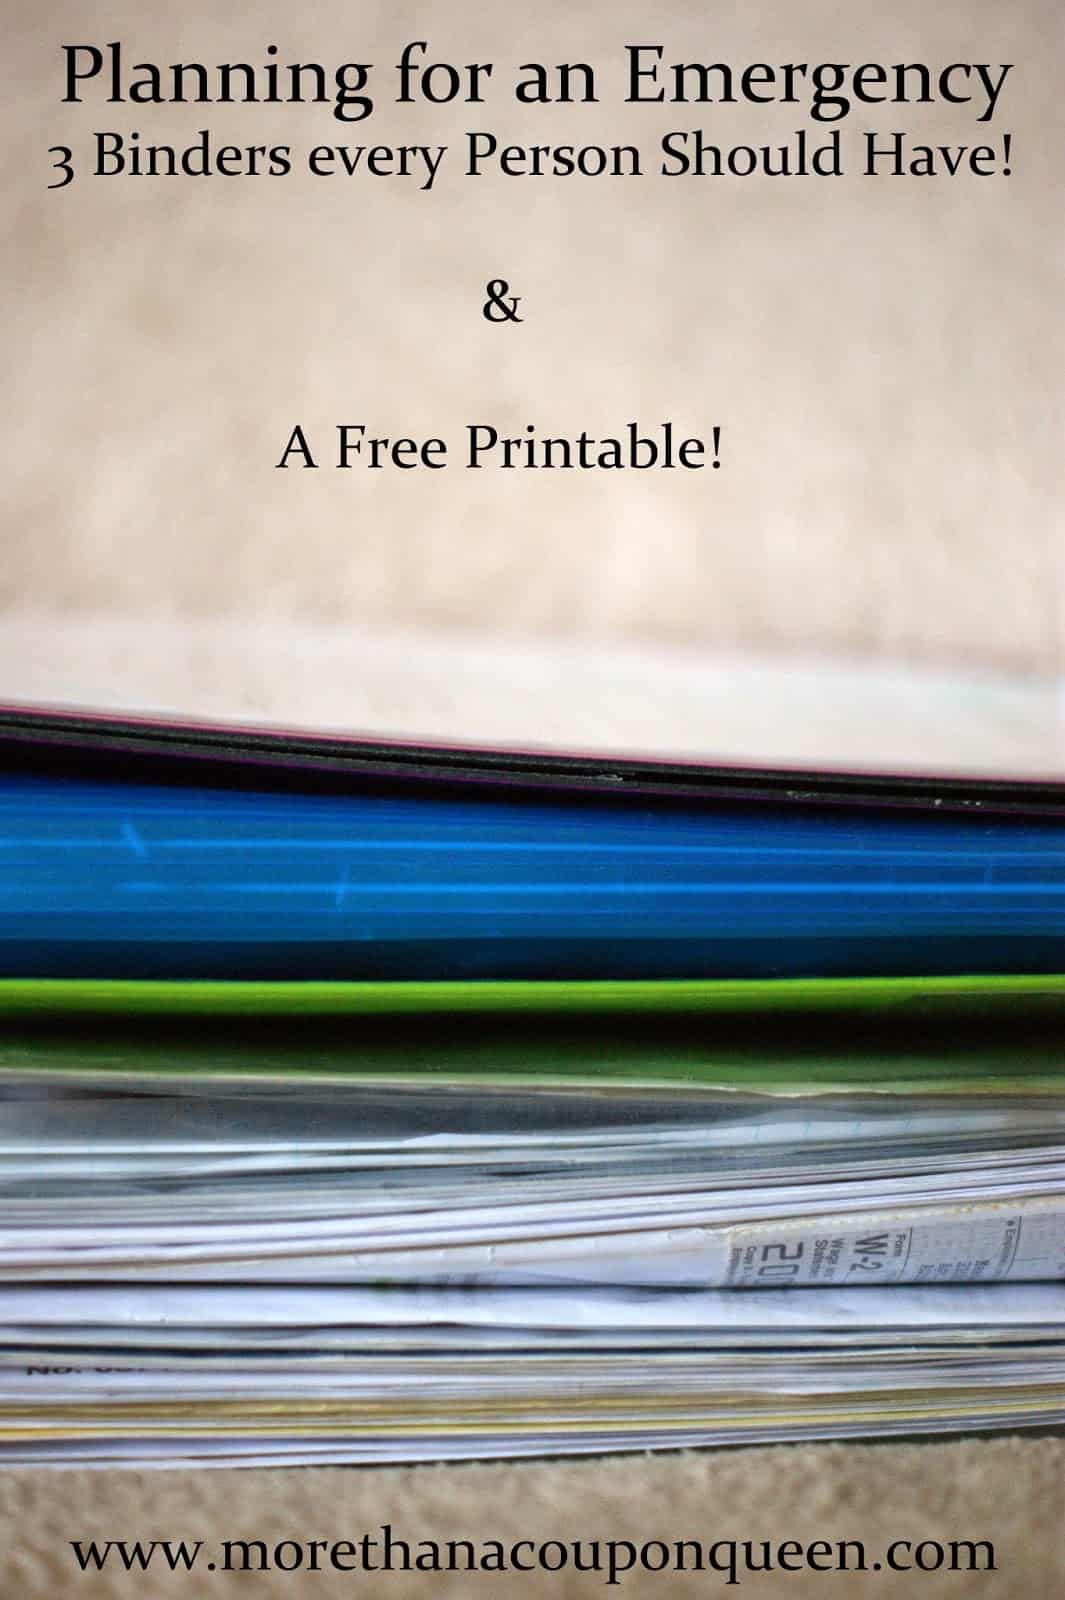 Planning for an Emergency – Emergency Binder and a Free Printable